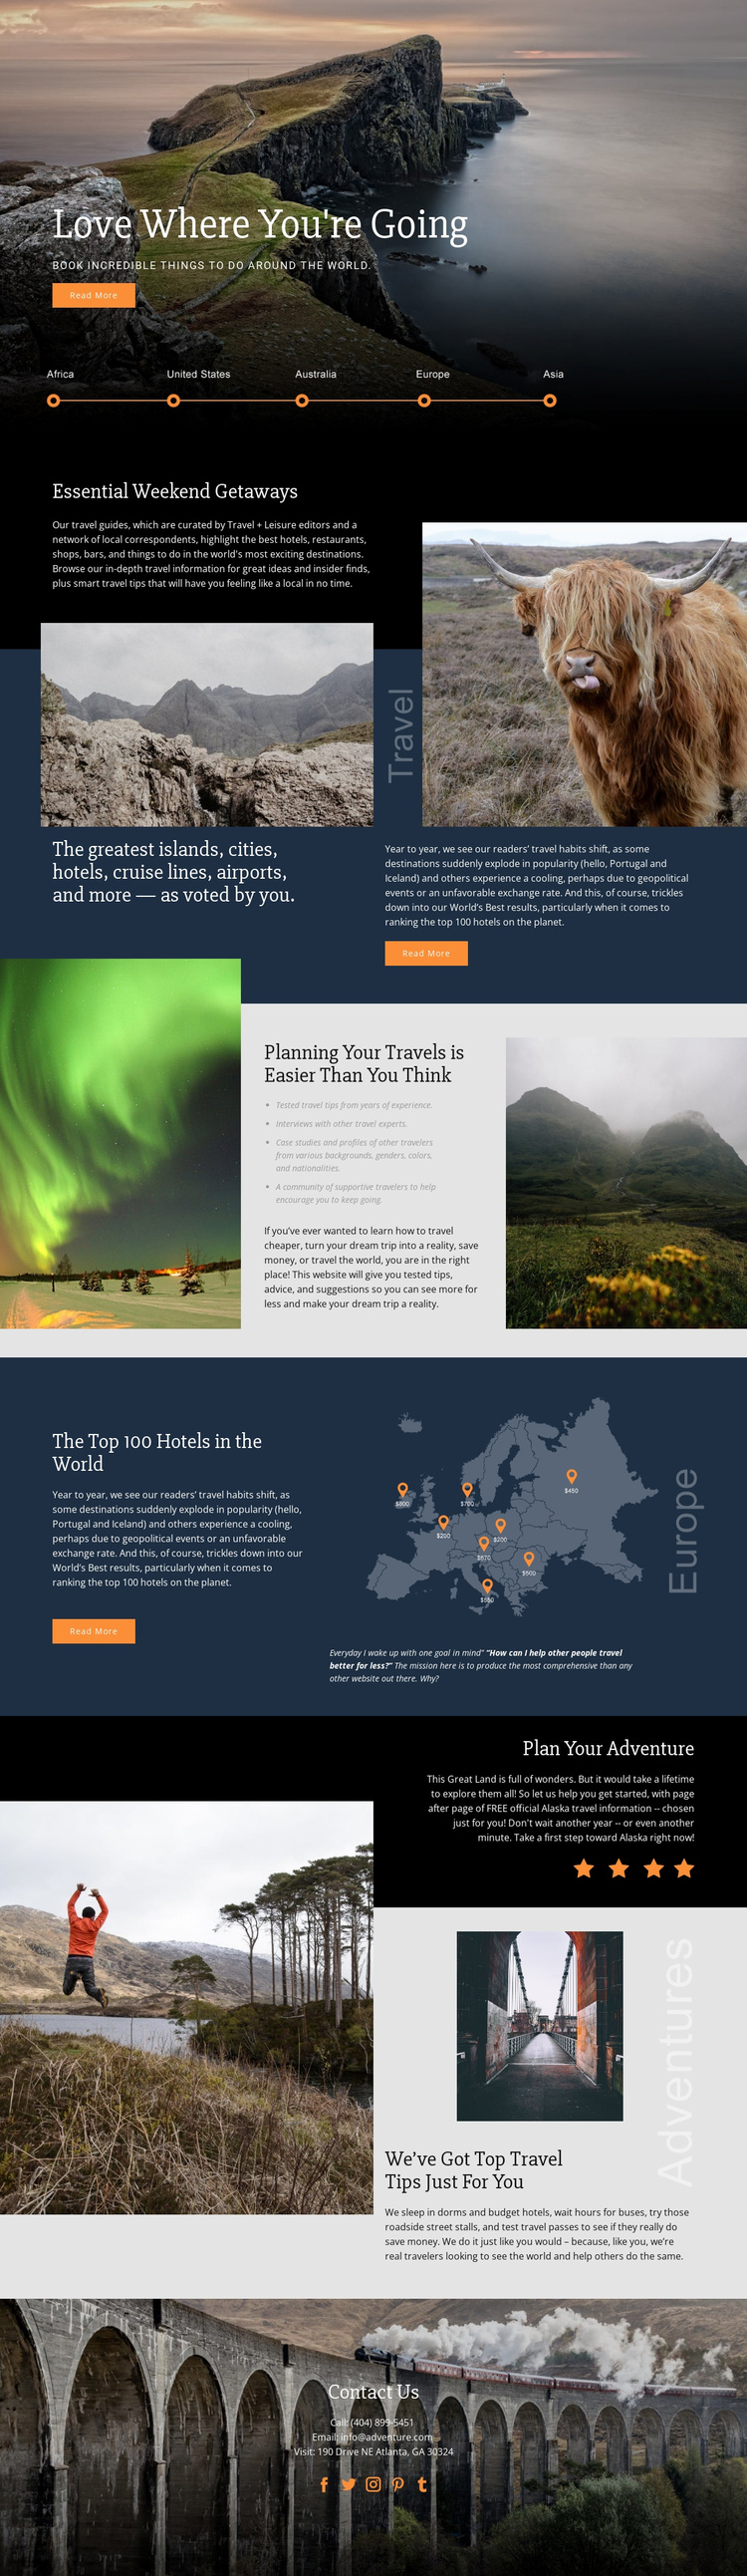 Planning Your Travel Website Template